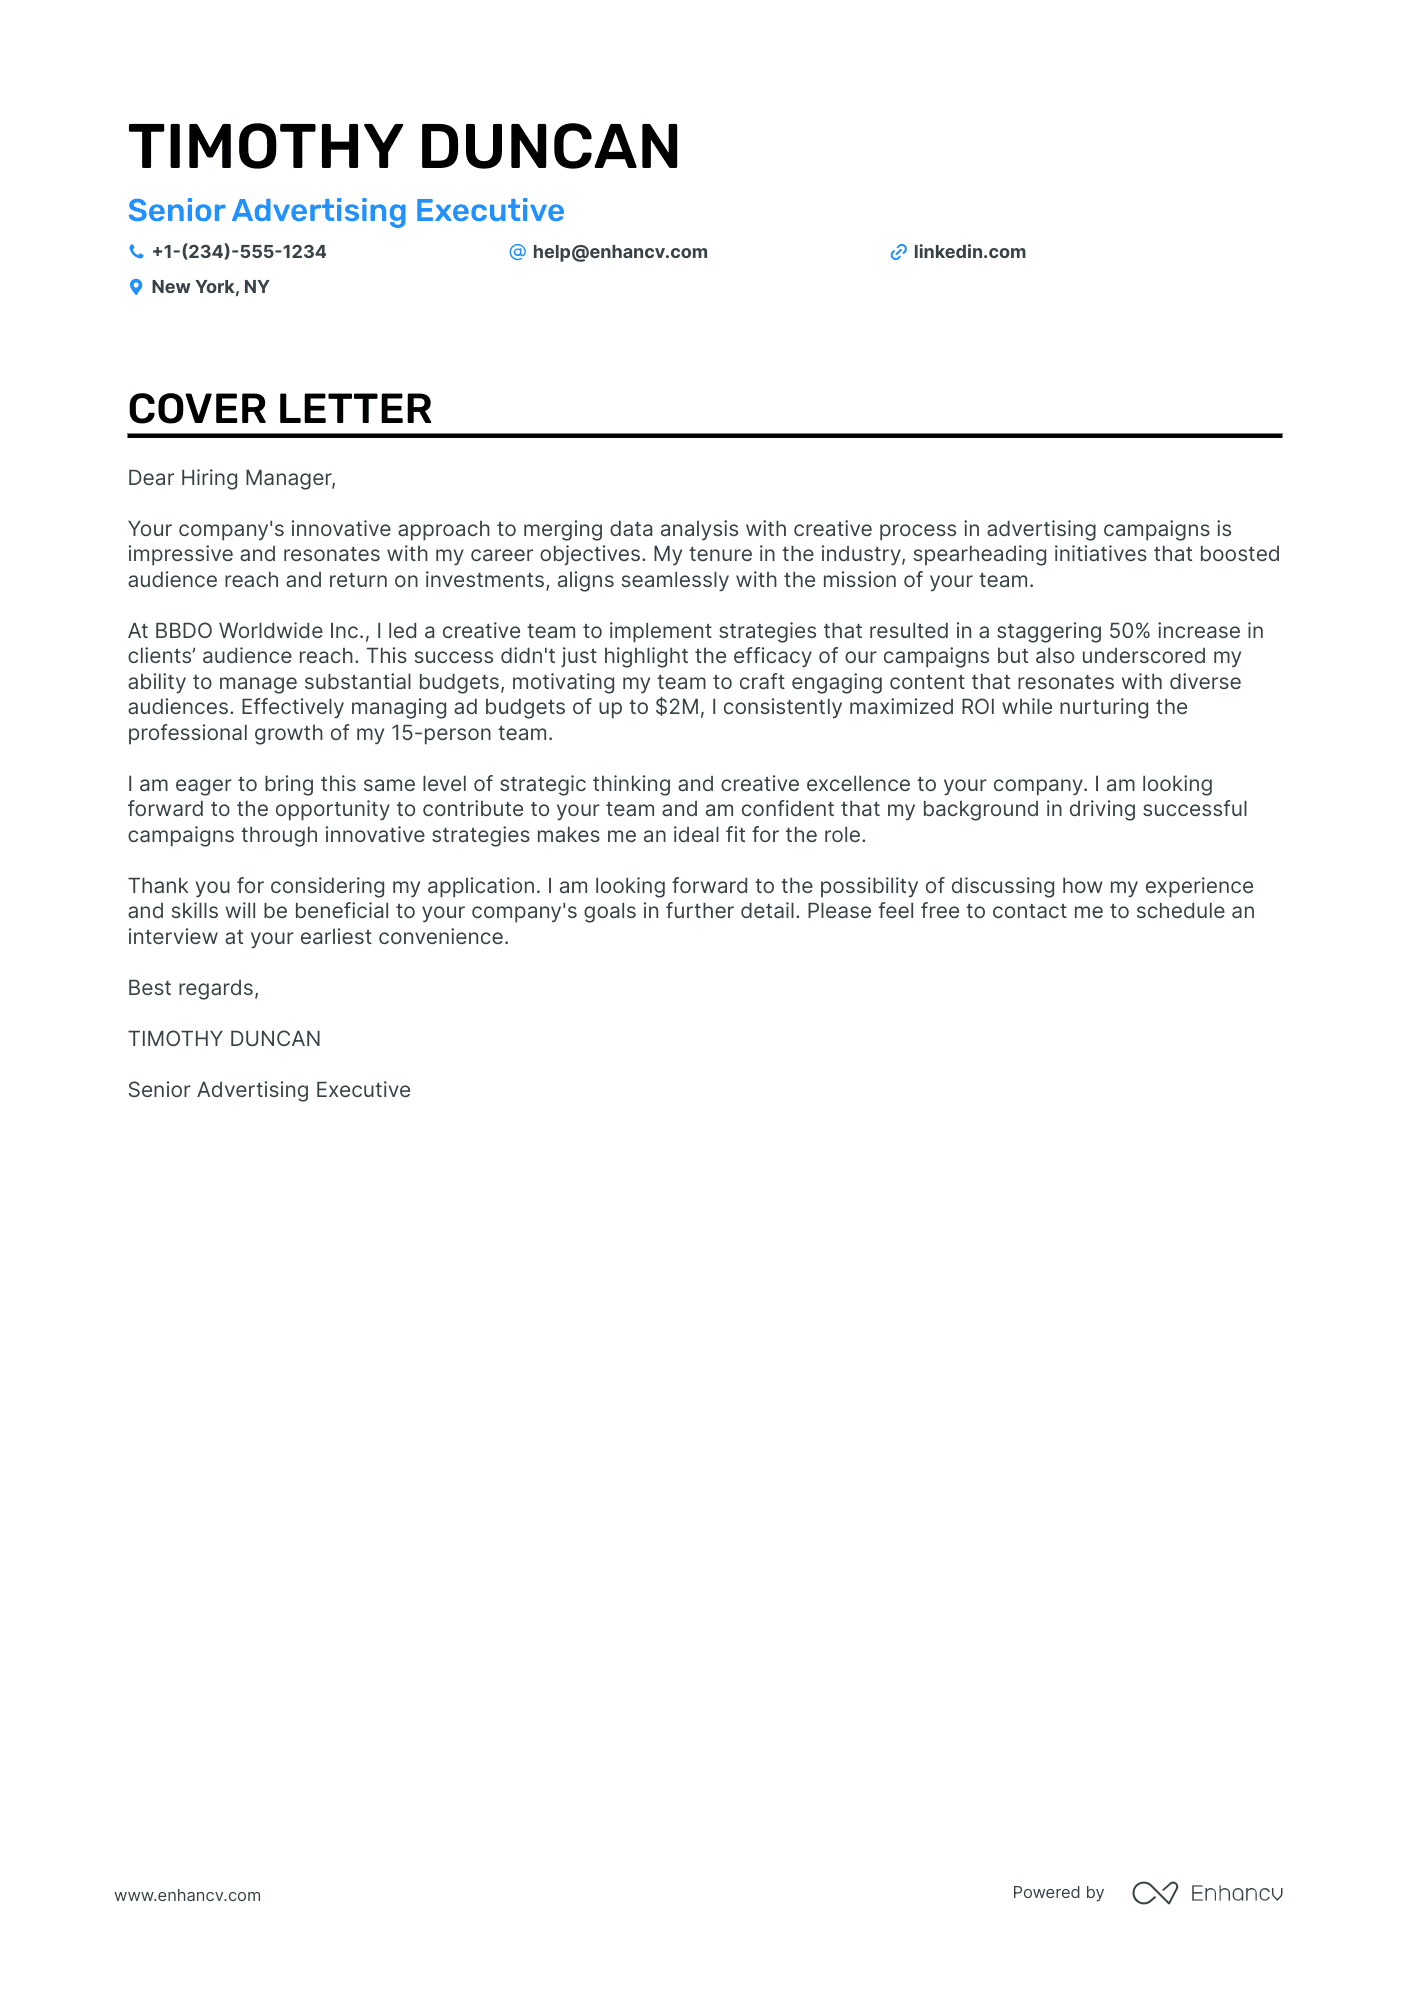 job advertisement and cover letter example